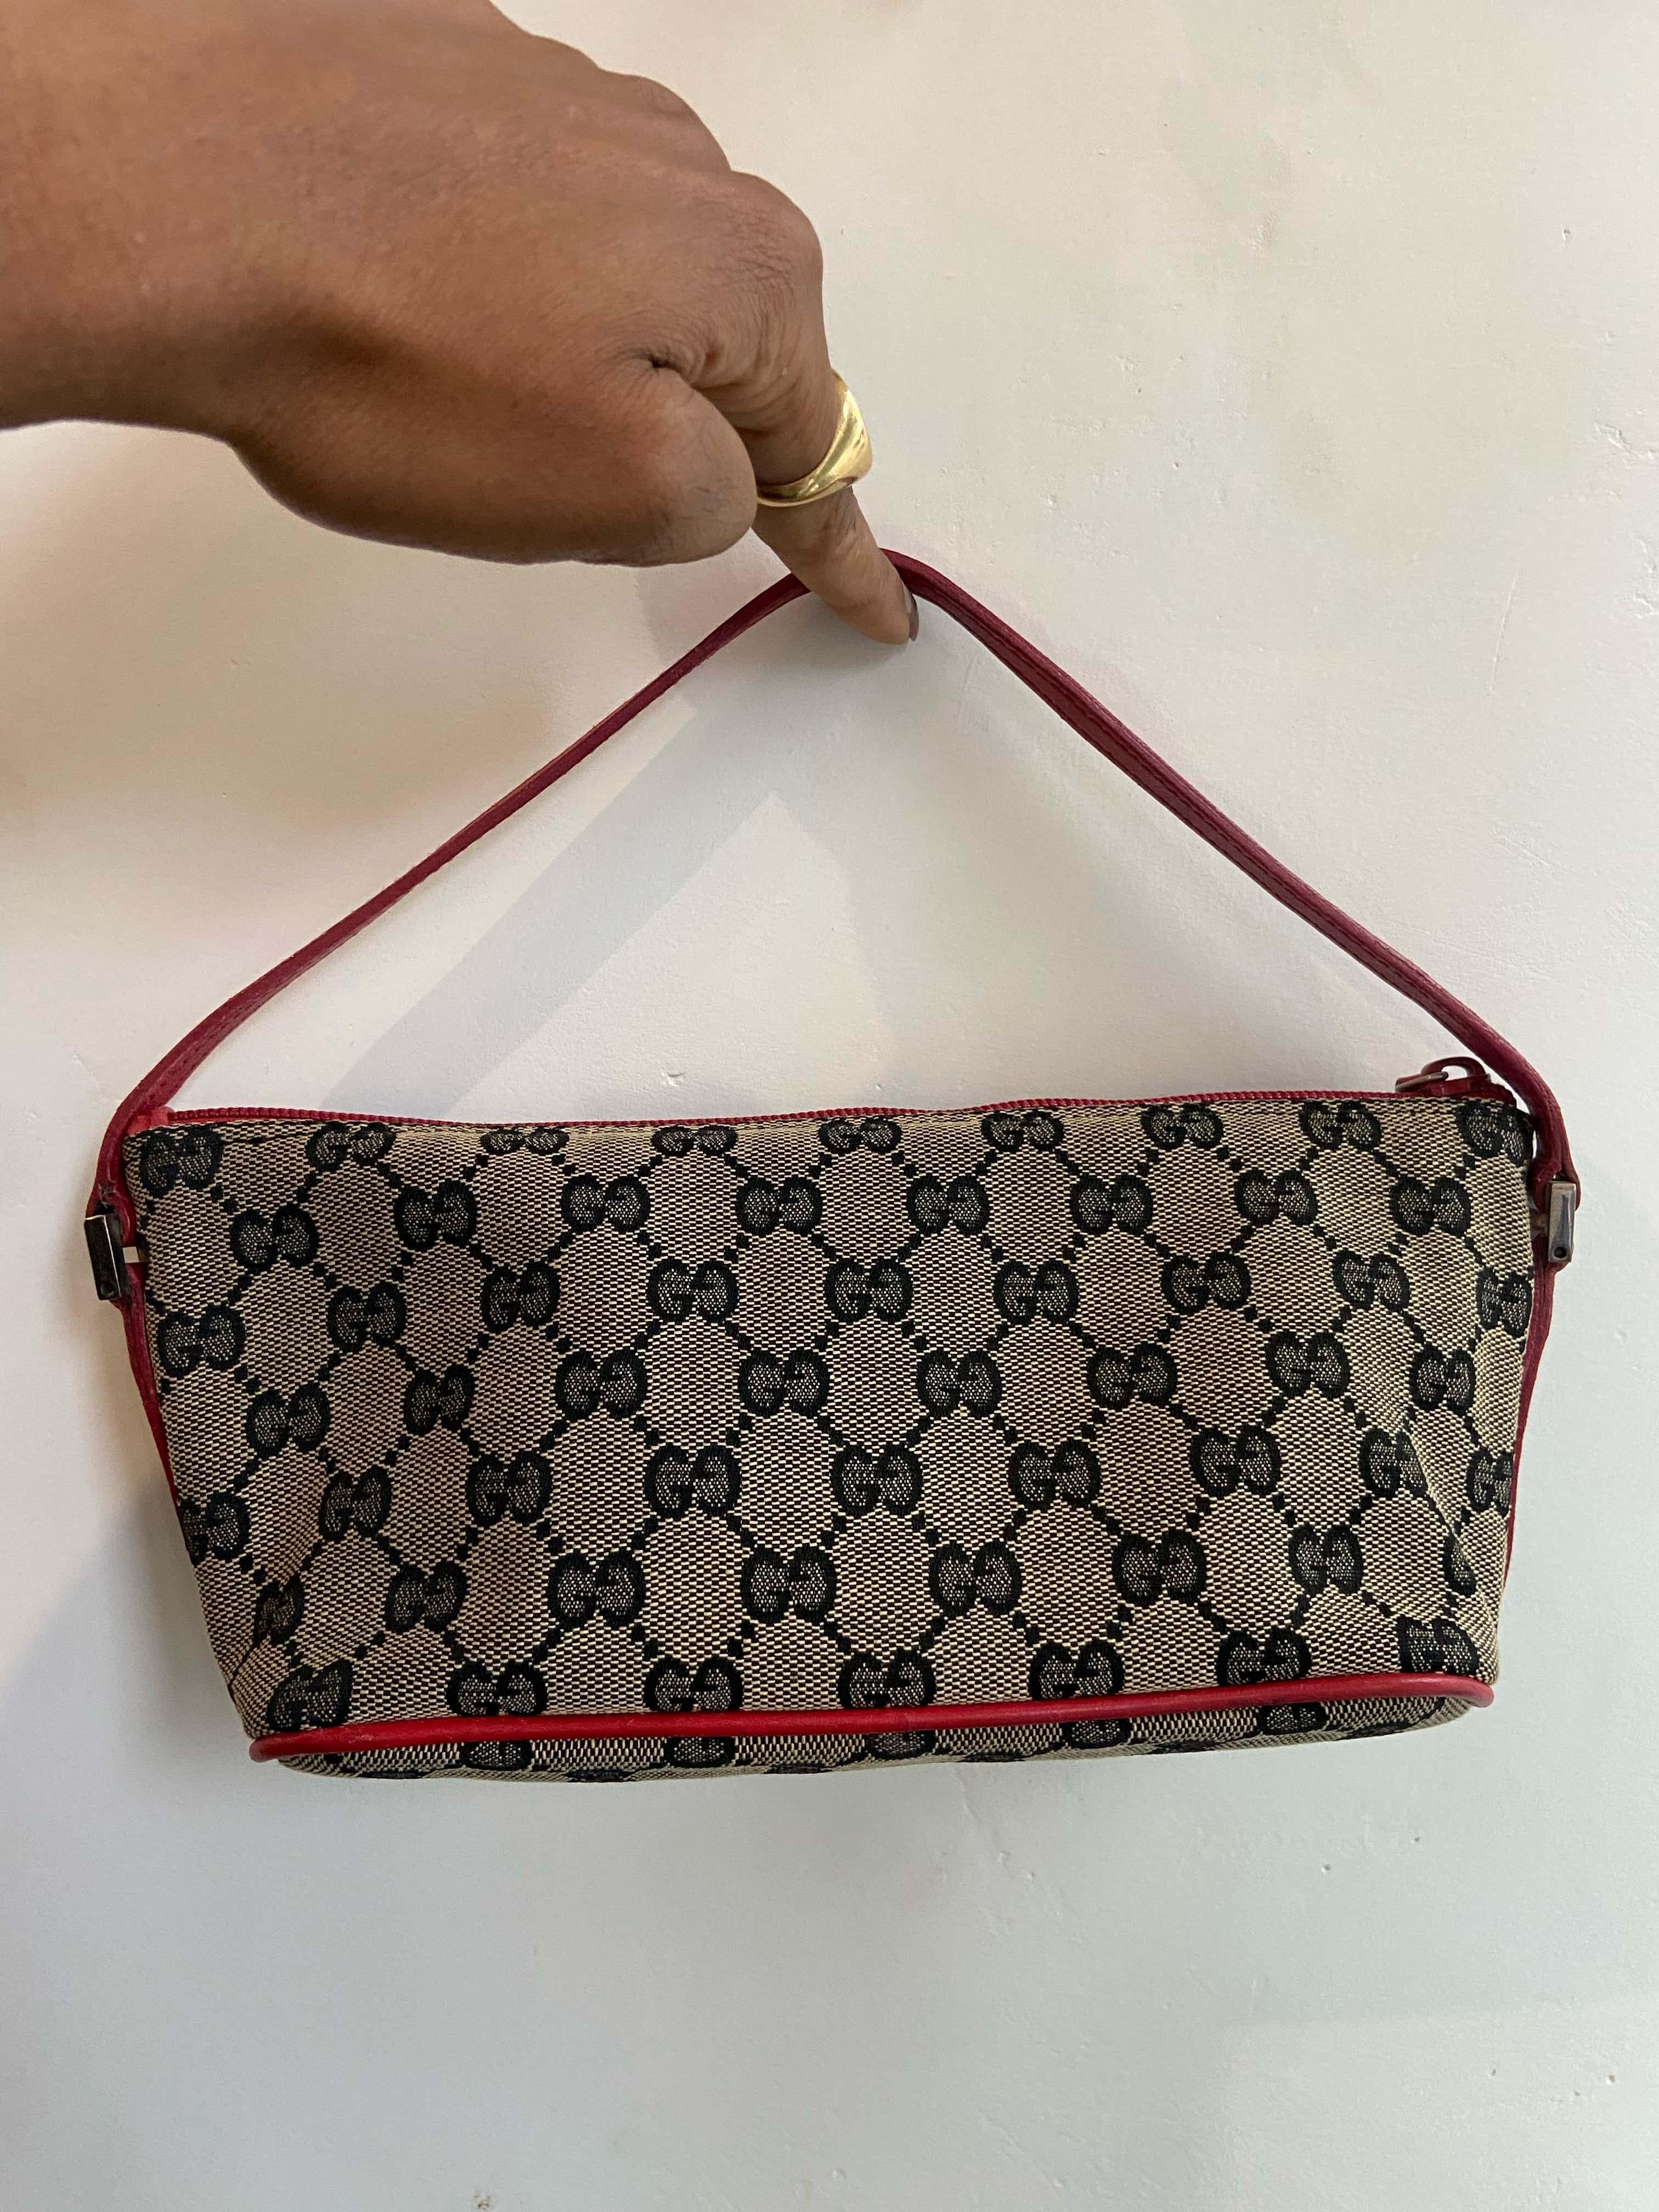 Gucci Circa 1990’s “GG” monogram boat canvas pochette bag. Features a rare red leather trim and strap and a silver Gucci front logo tone hardware. Fastens with a top zipper. 

Brand: Gucci
Color: Brown/ Red
Year/ Season : Circa 1990’s
Boat